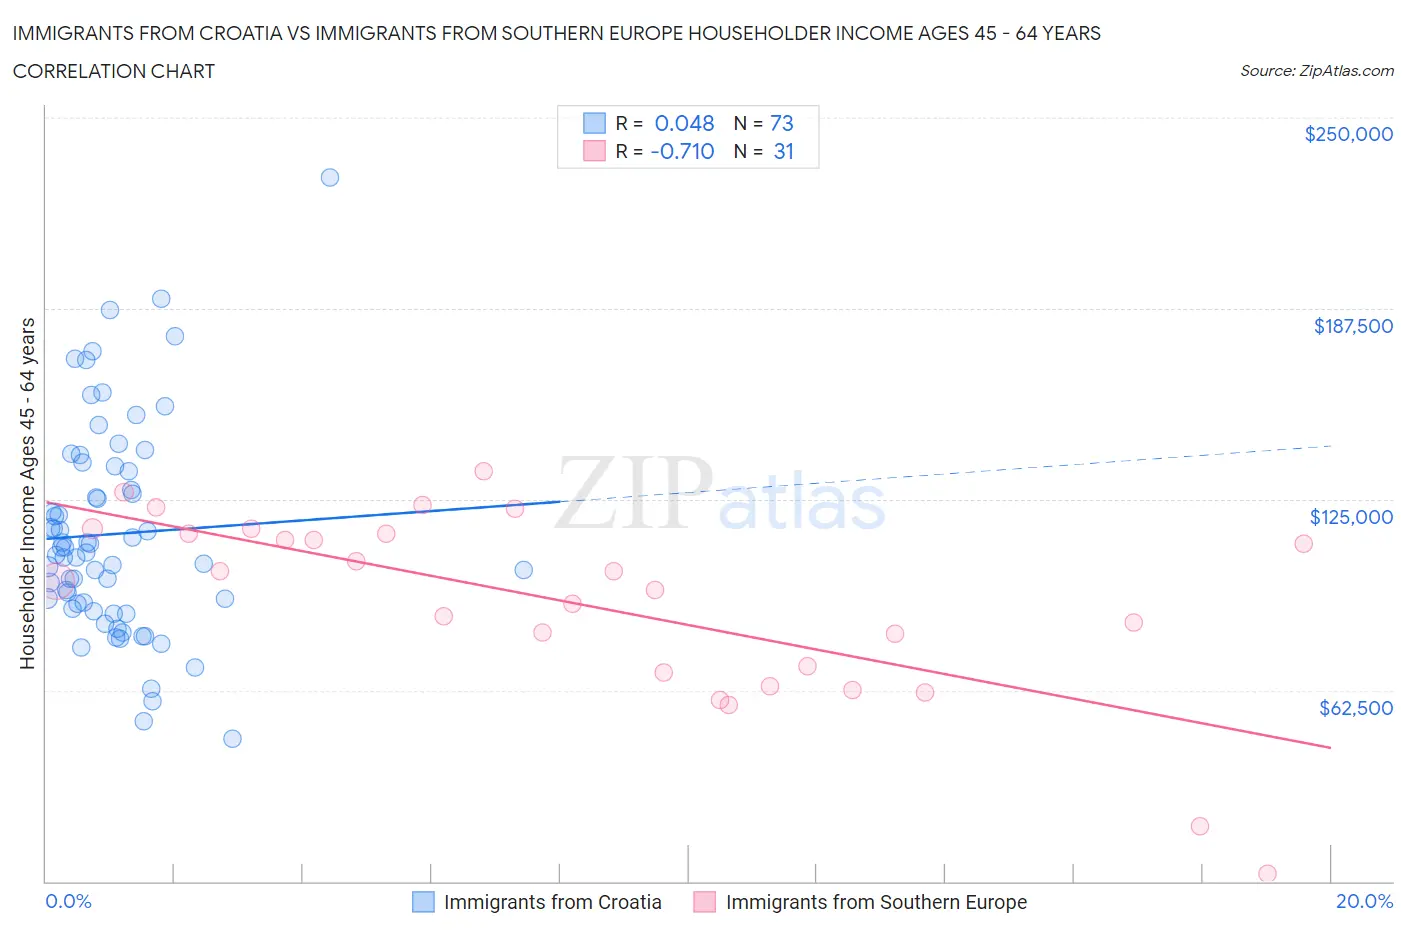 Immigrants from Croatia vs Immigrants from Southern Europe Householder Income Ages 45 - 64 years